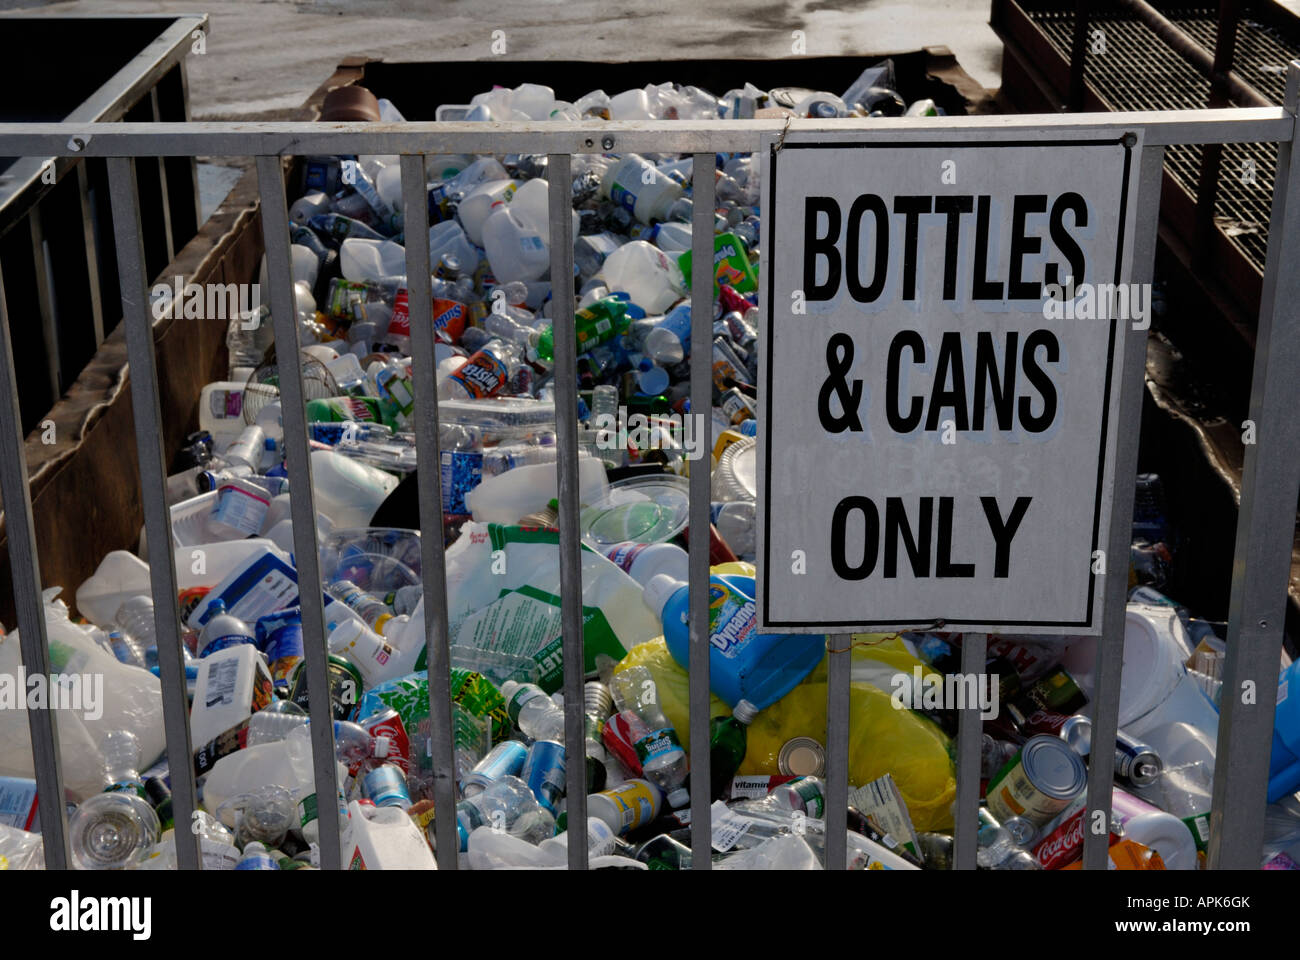 Bottles and cans at a recycling collection area The collection is part of a municipal recycling center in Ringwood NJ Stock Photo